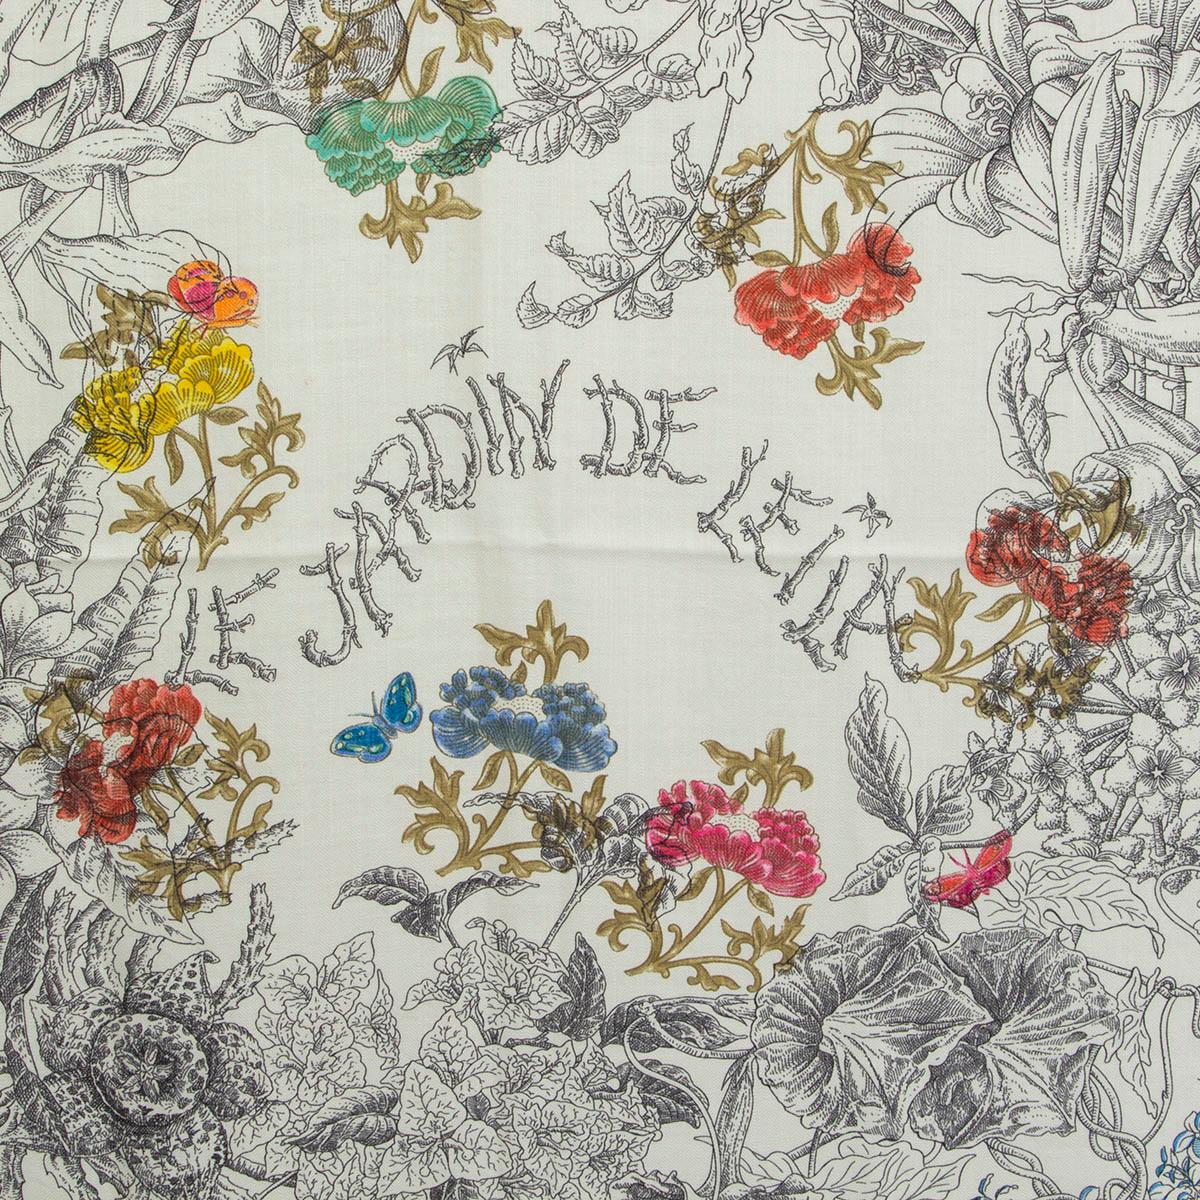 100% authentic Hermès 'Le Jardin de Leila 140' shawl by Francois Houtin in pale orange and off-white cashmere (70%) and silk (30%) with details in anthracite, grey, orange, olive green, yellow, pink, blue and burgundy. Brand new. 

Gardens inhabit